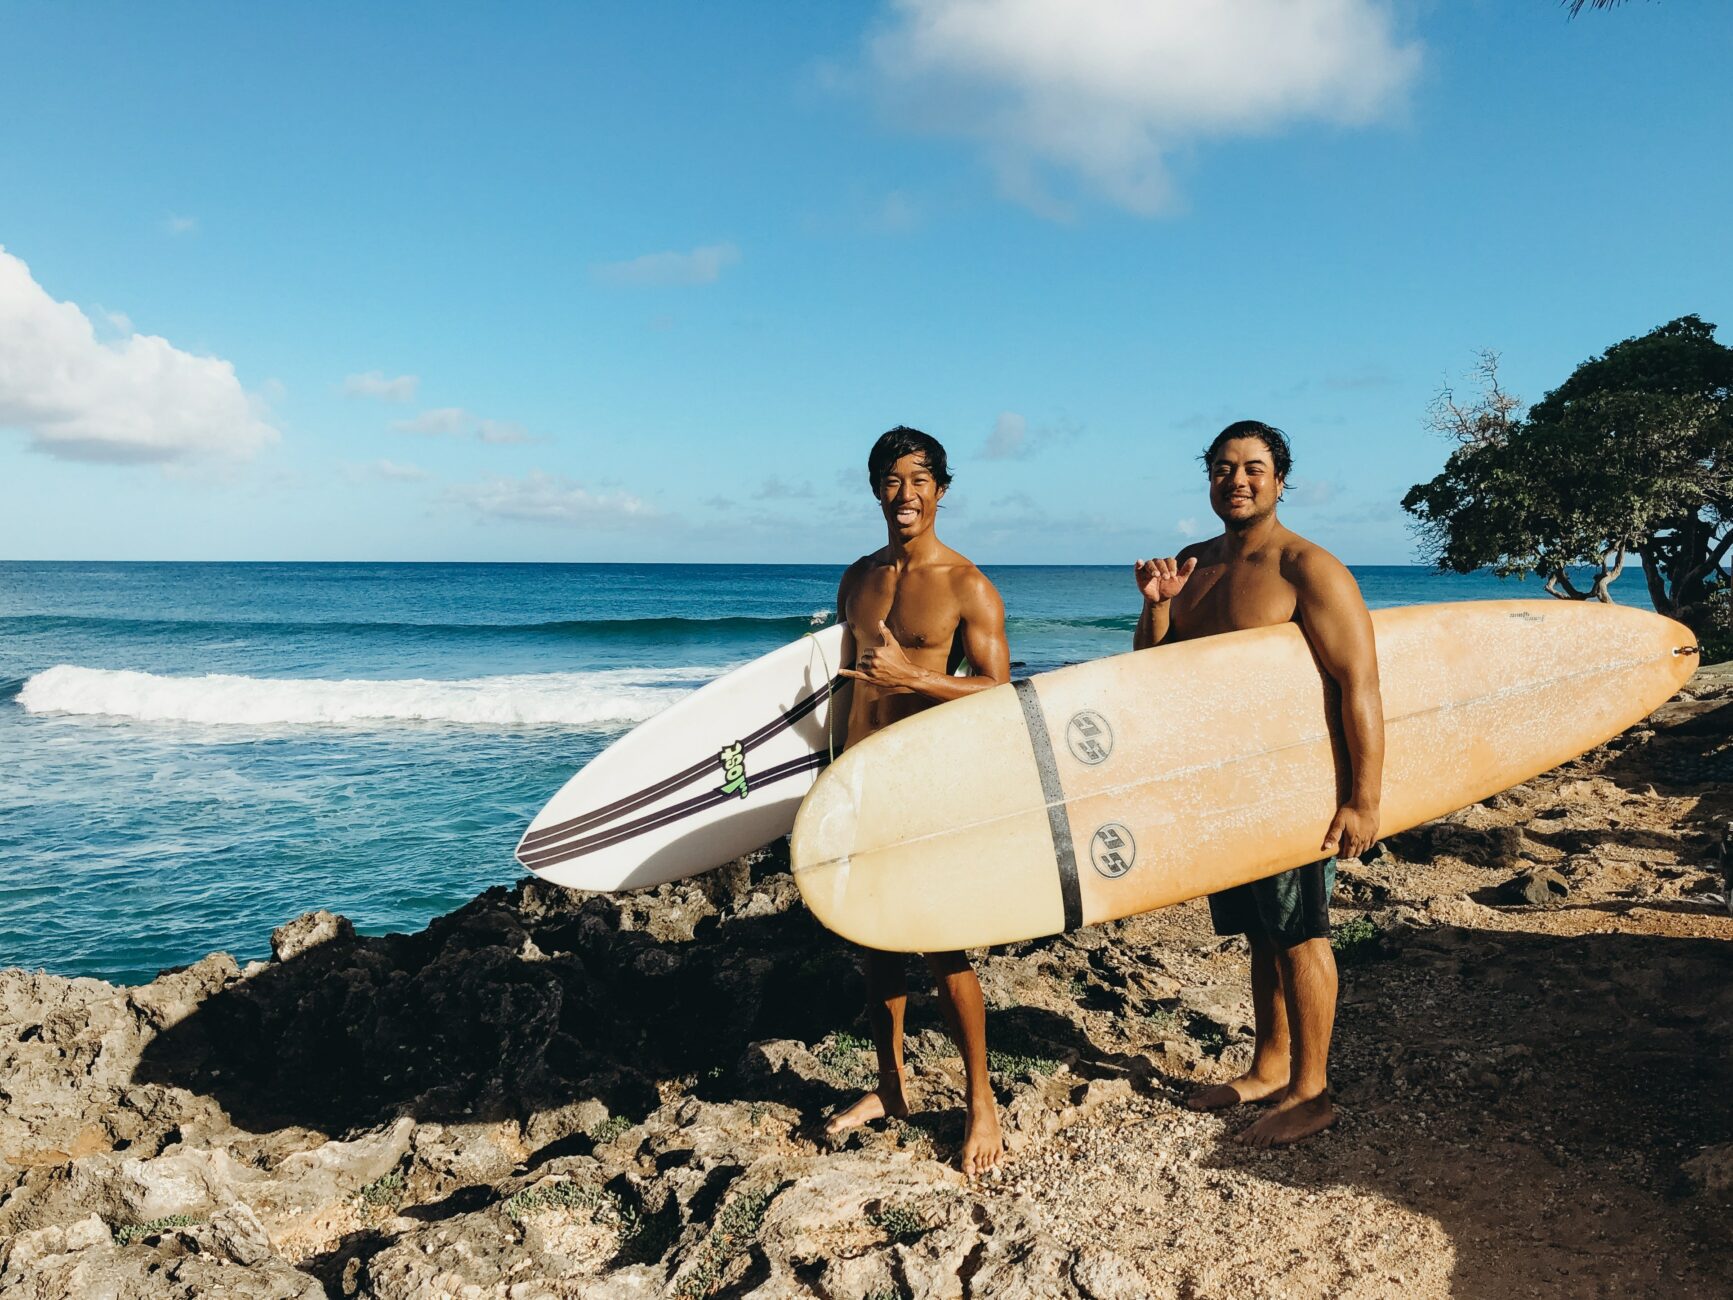 North Shore Surf Spots (Beginner to Experienced)